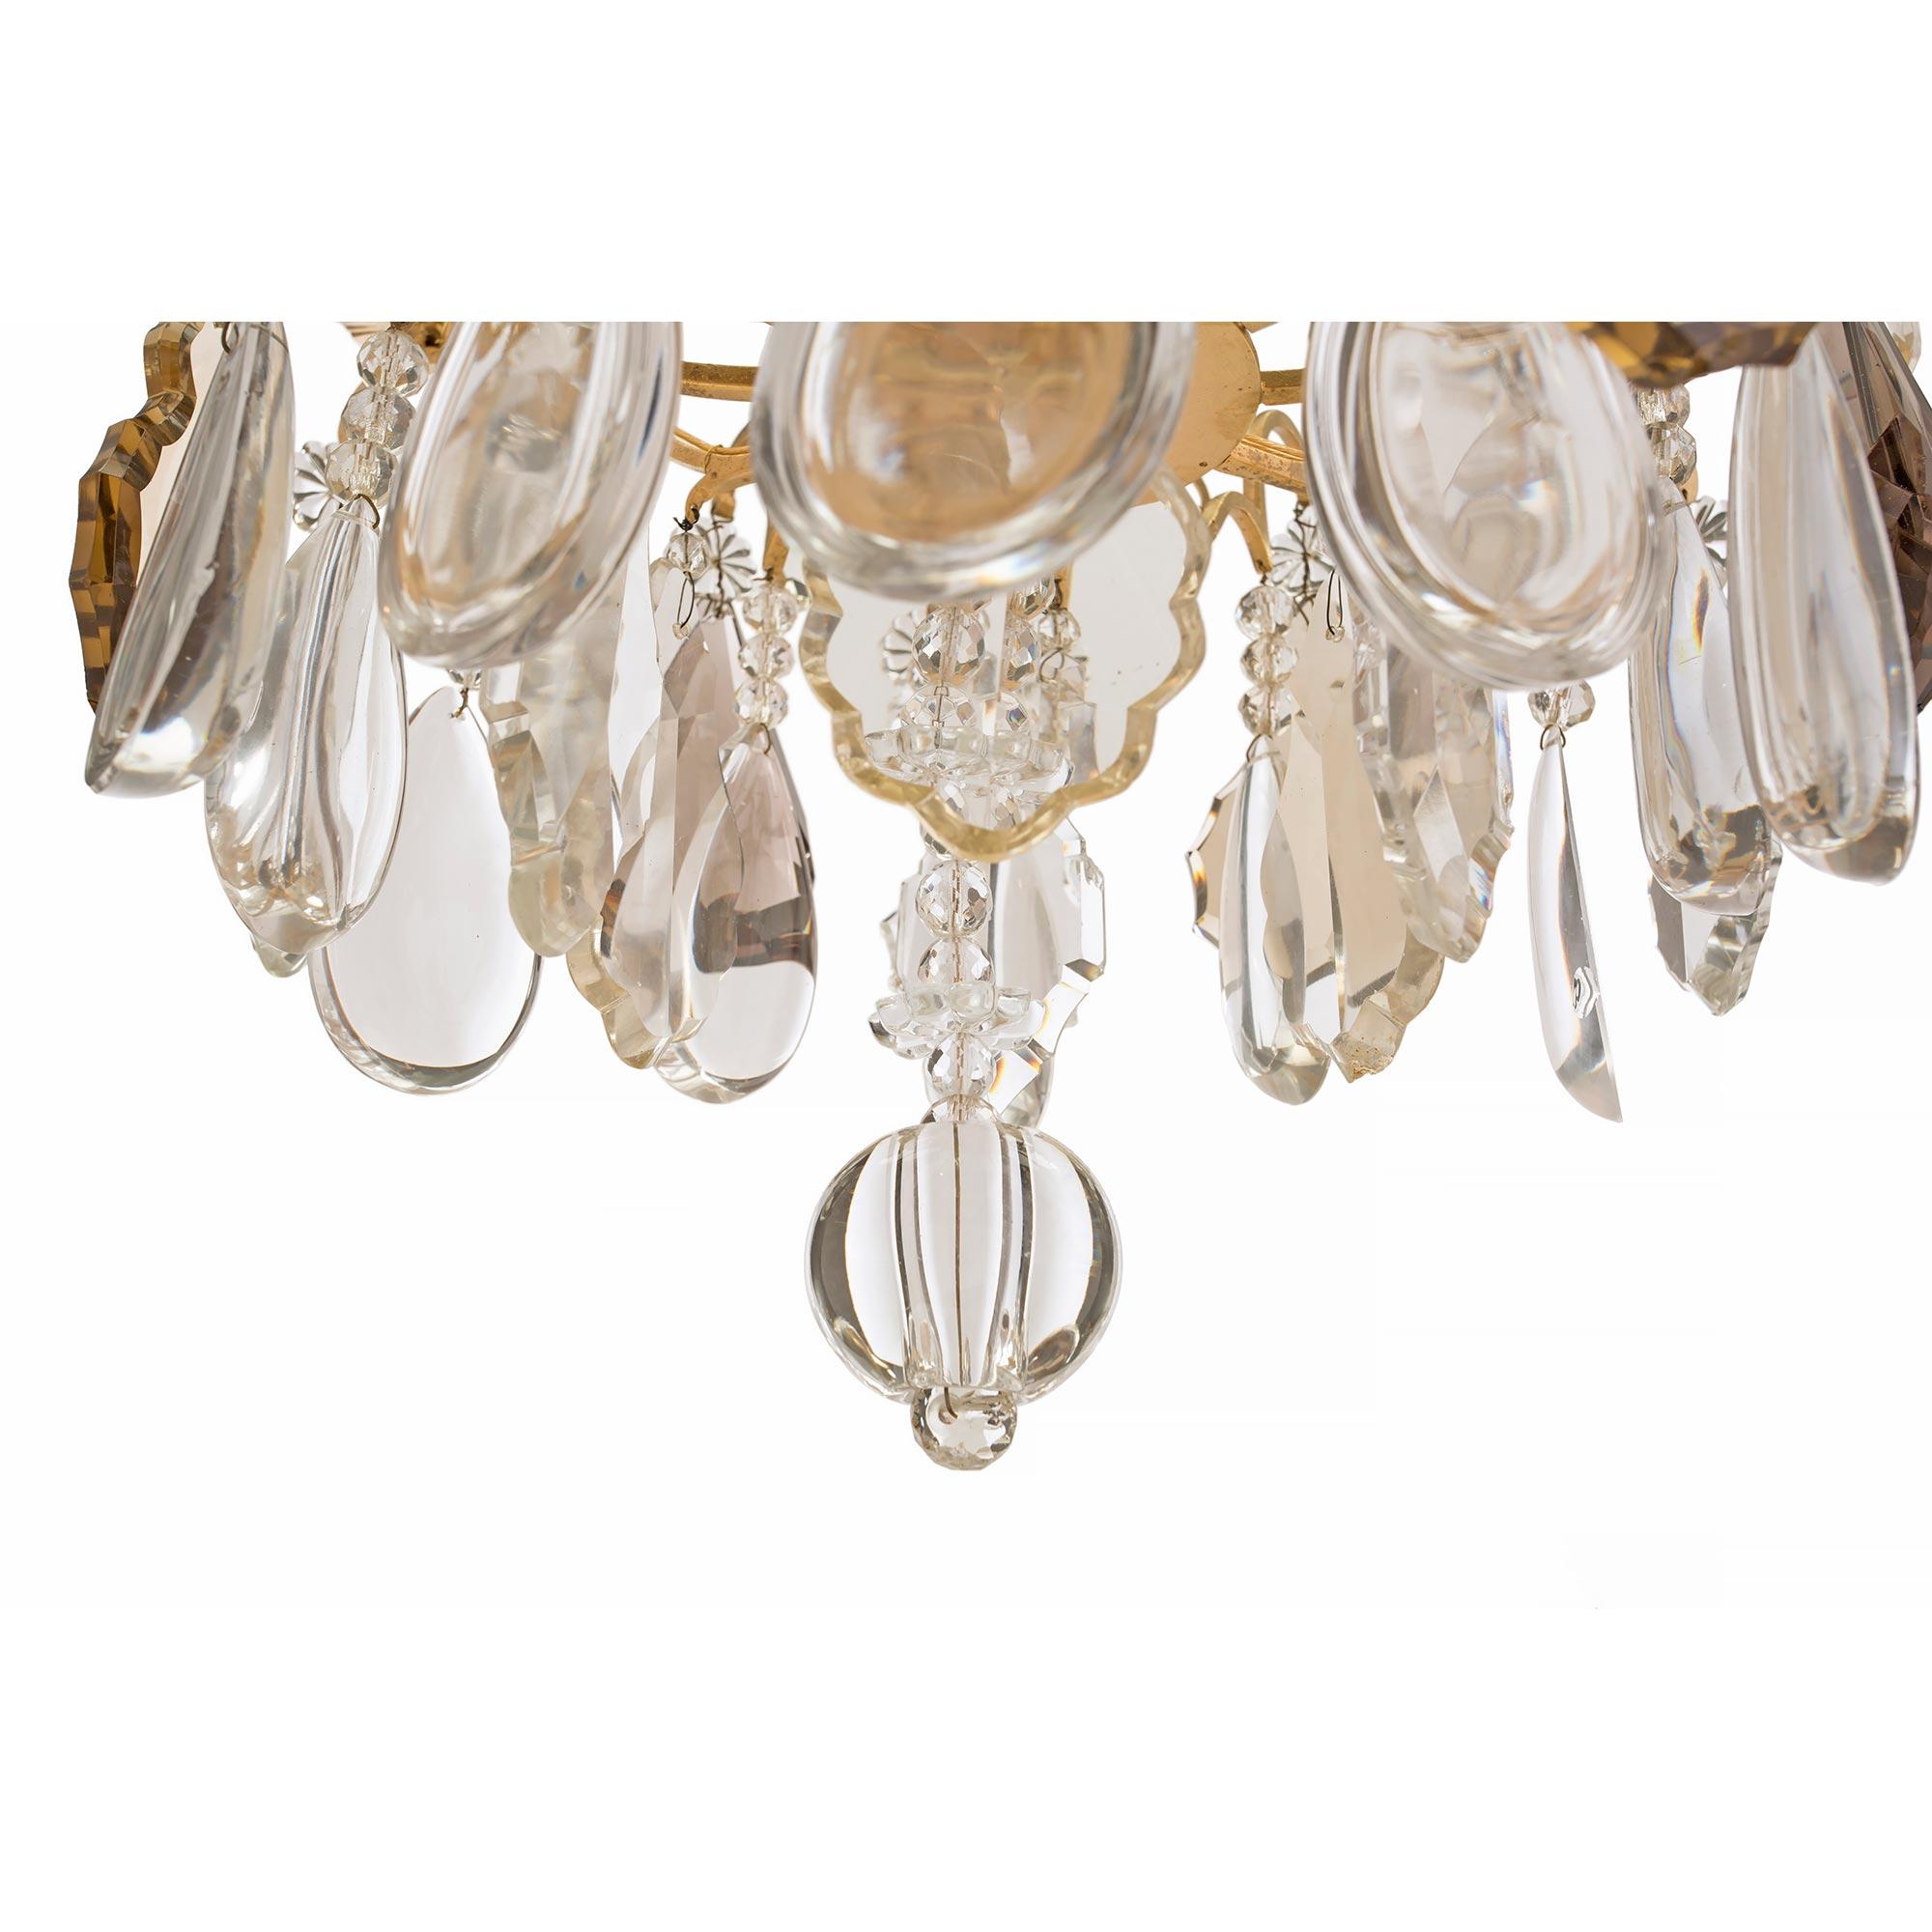 French Mid-19th Century Louis XV Style Baccarat Crystal and Ormolu Chandelier For Sale 2